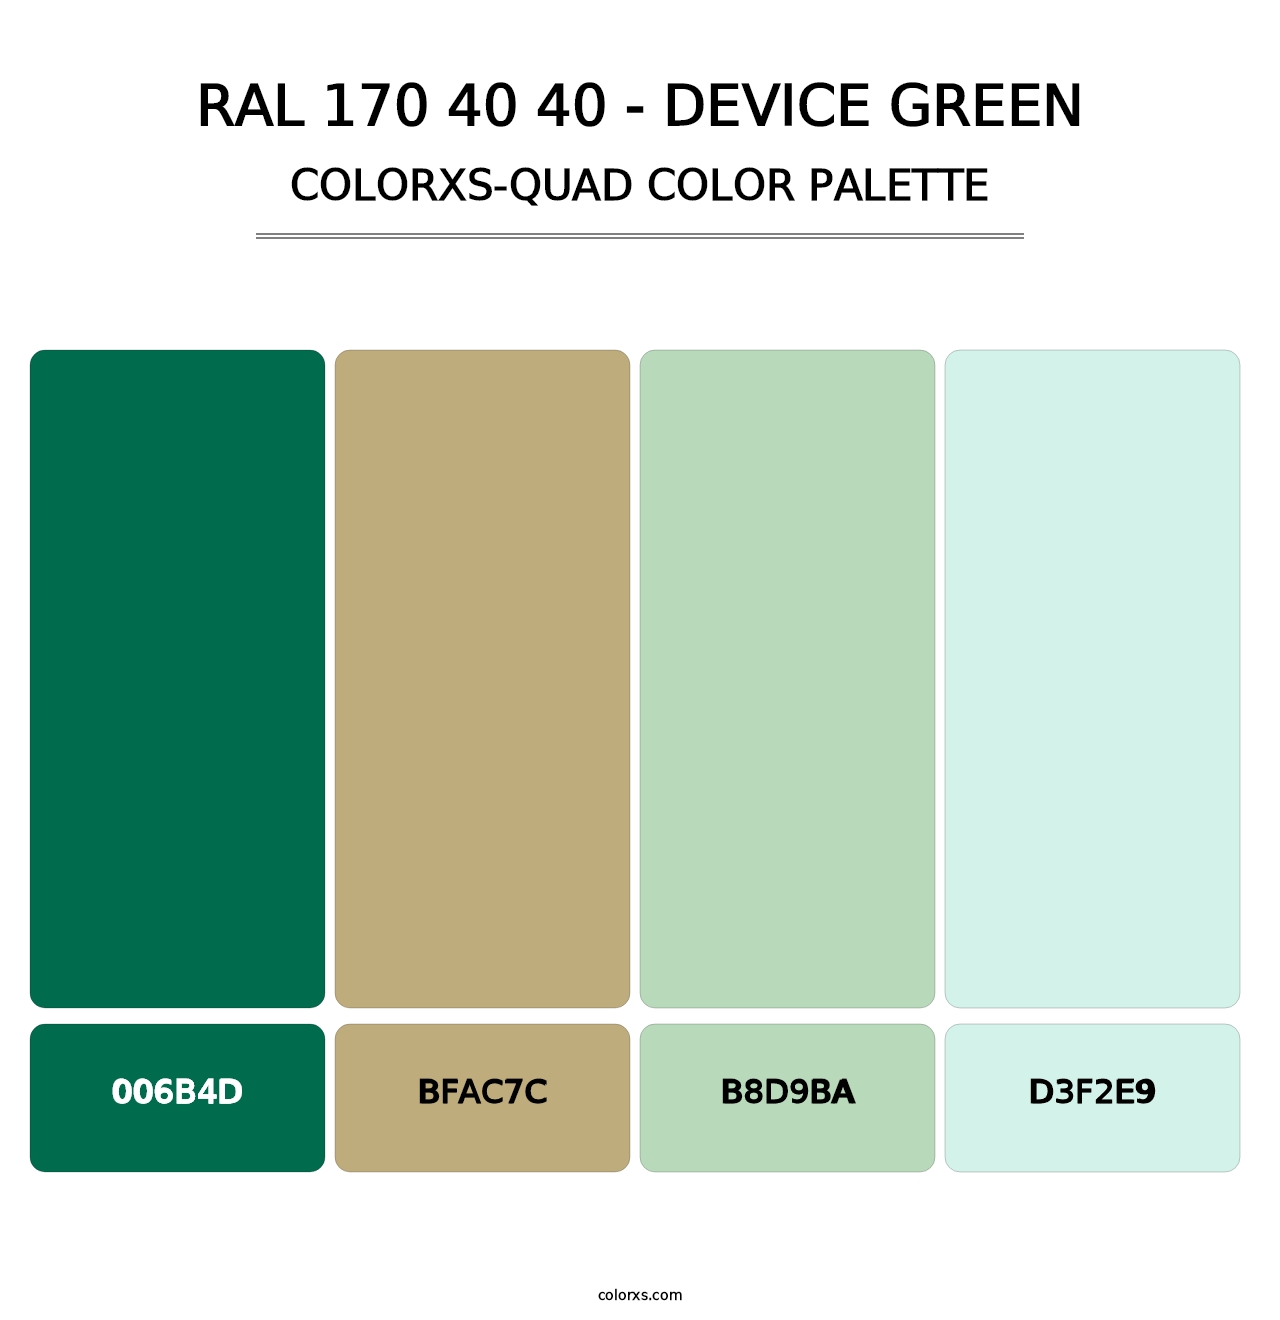 RAL 170 40 40 - Device Green - Colorxs Quad Palette